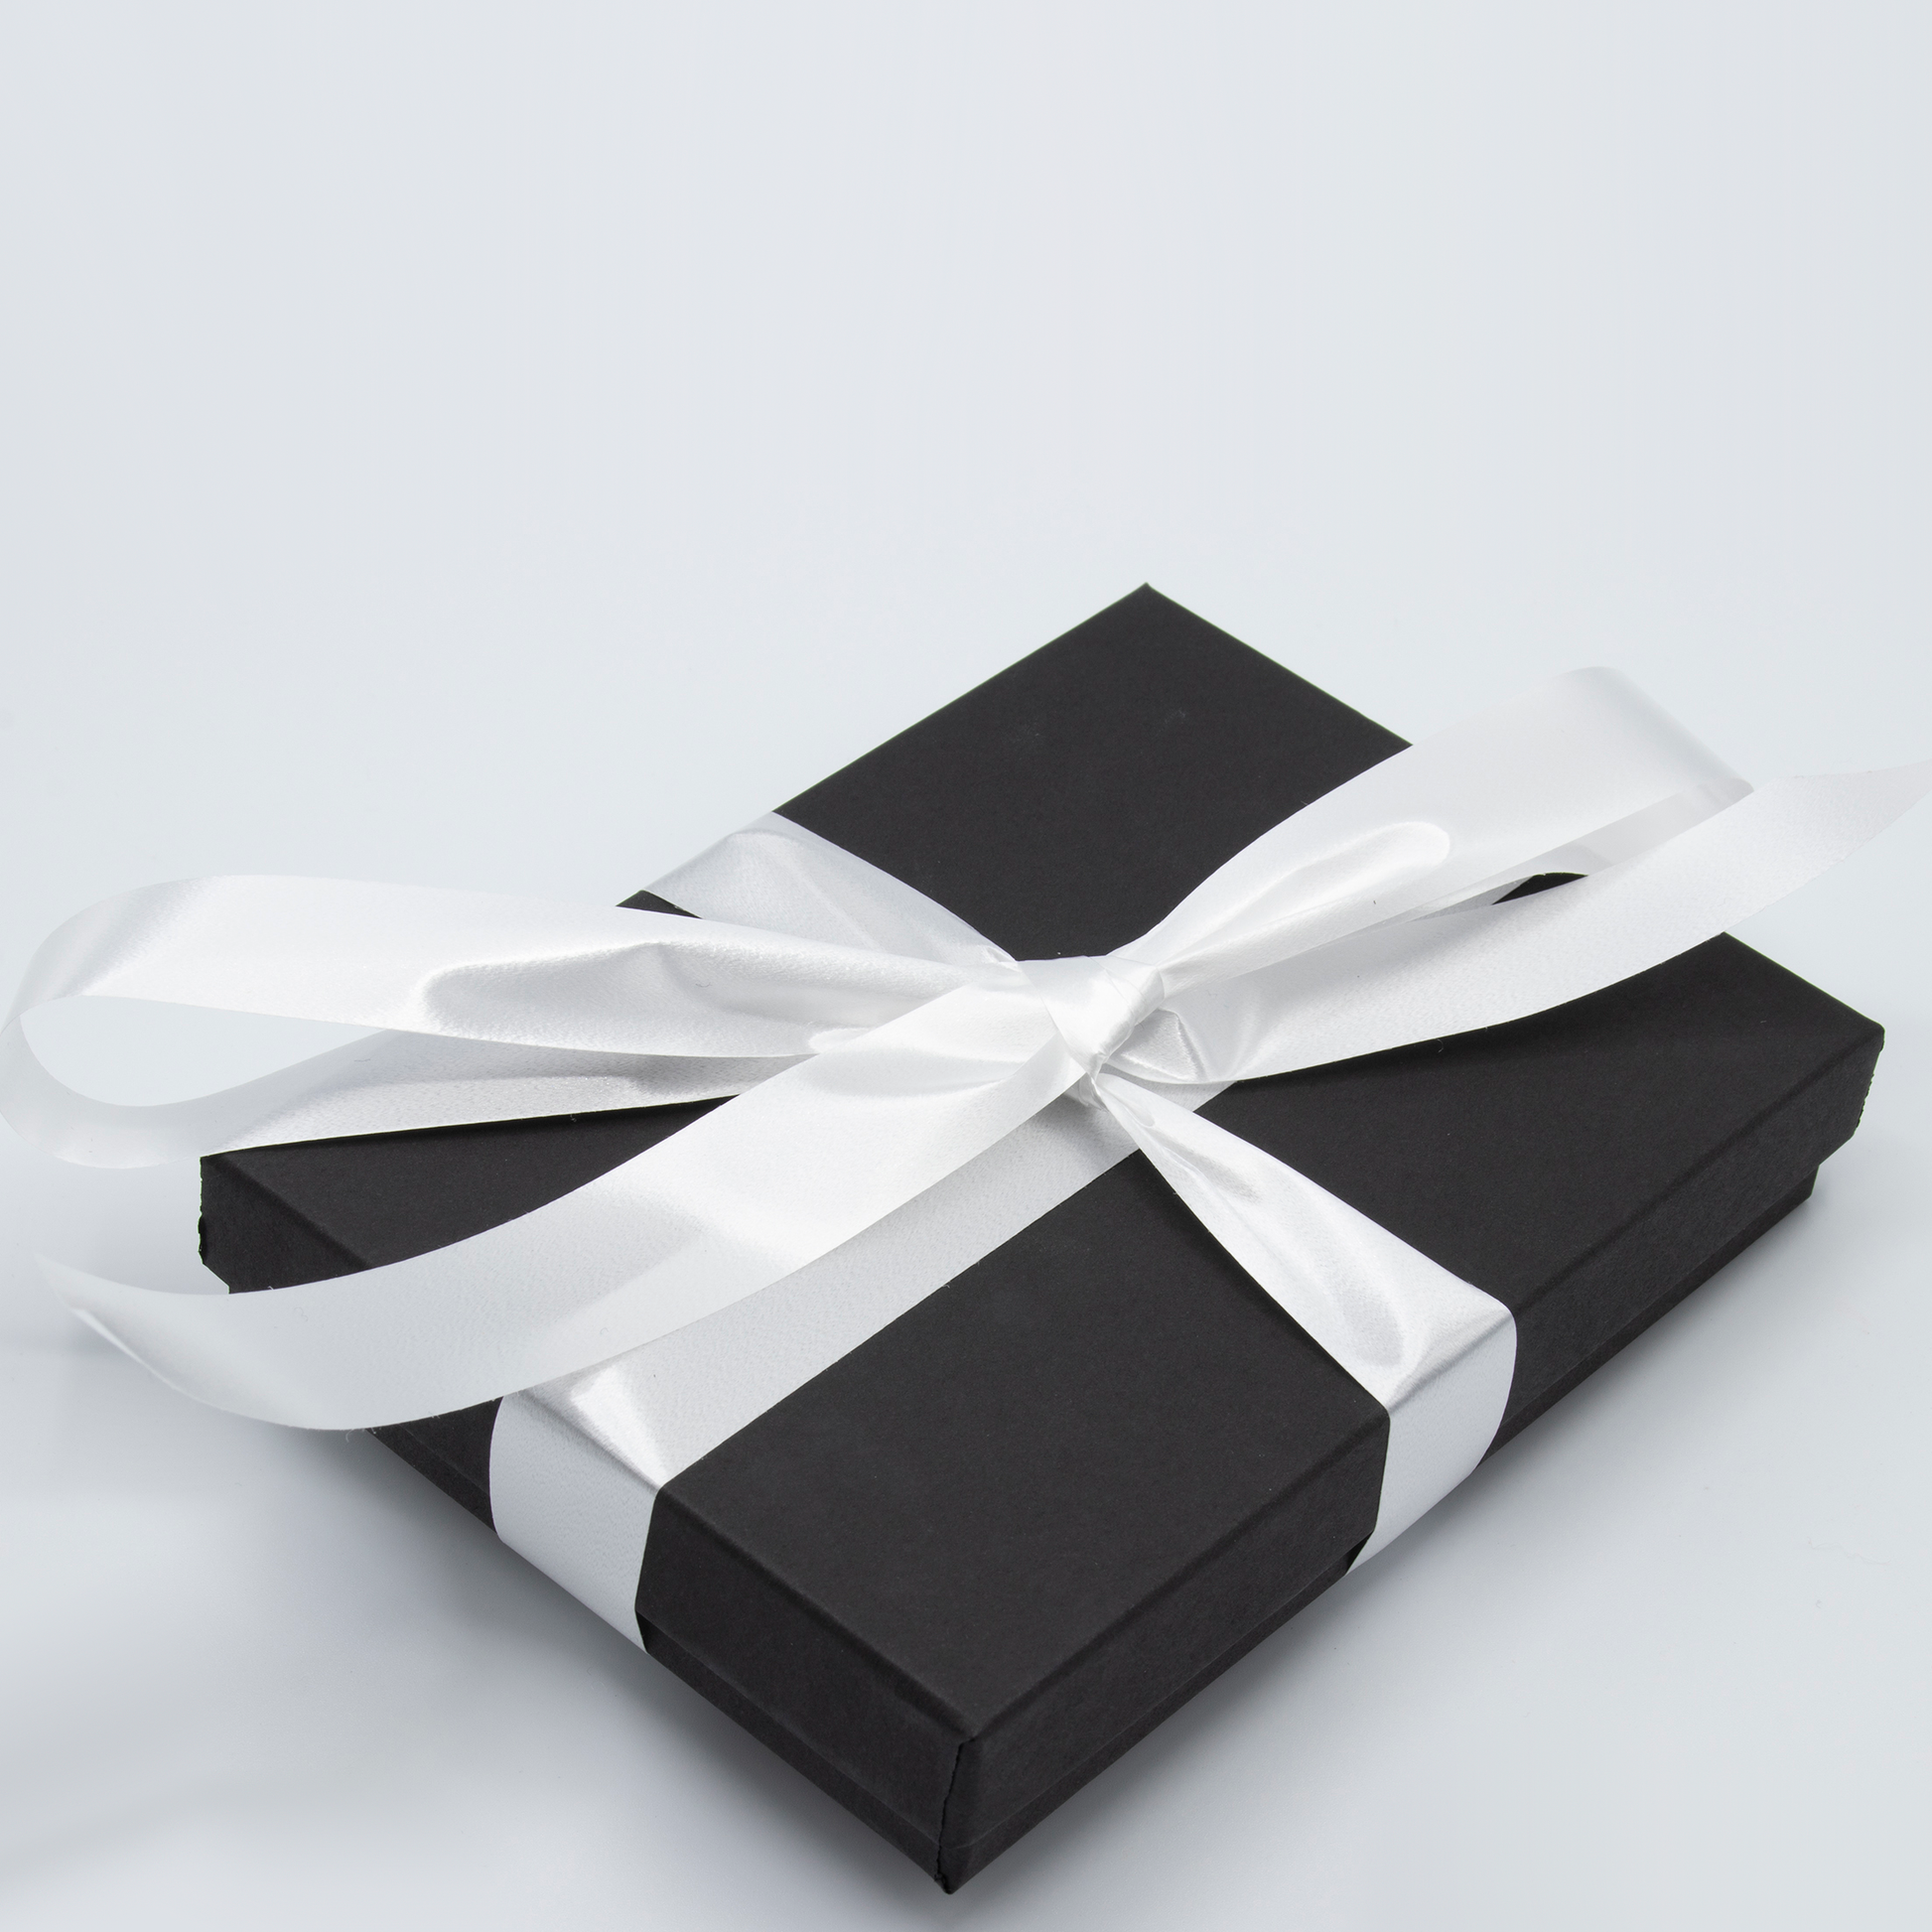 Black Gift Box with White Ribbon is included with Atomic Earrings by AtomicMobiles.com